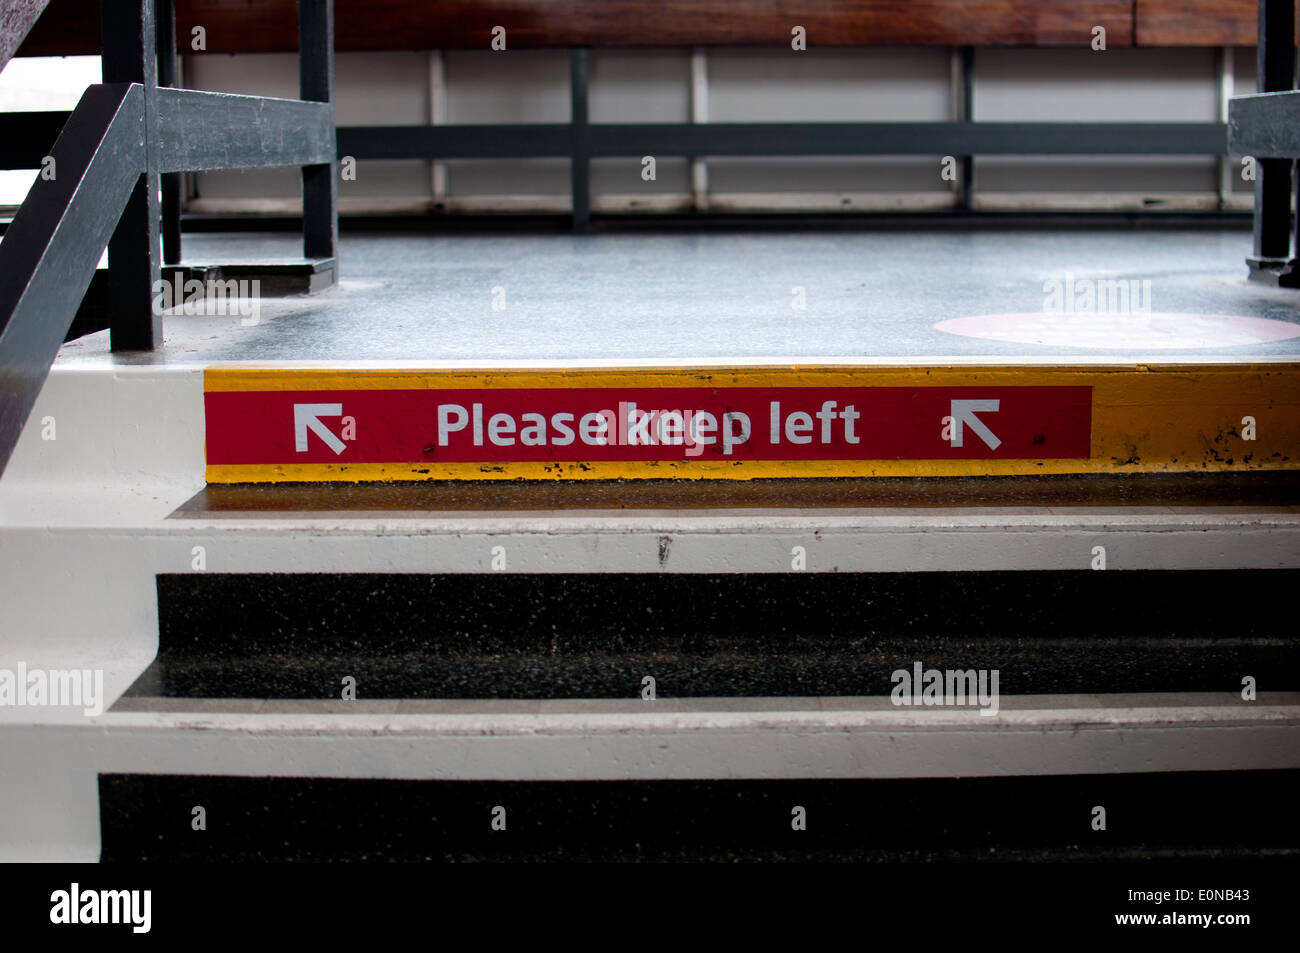 Please keep left sign on stairs at Coventry railway station, UK Stock Photo